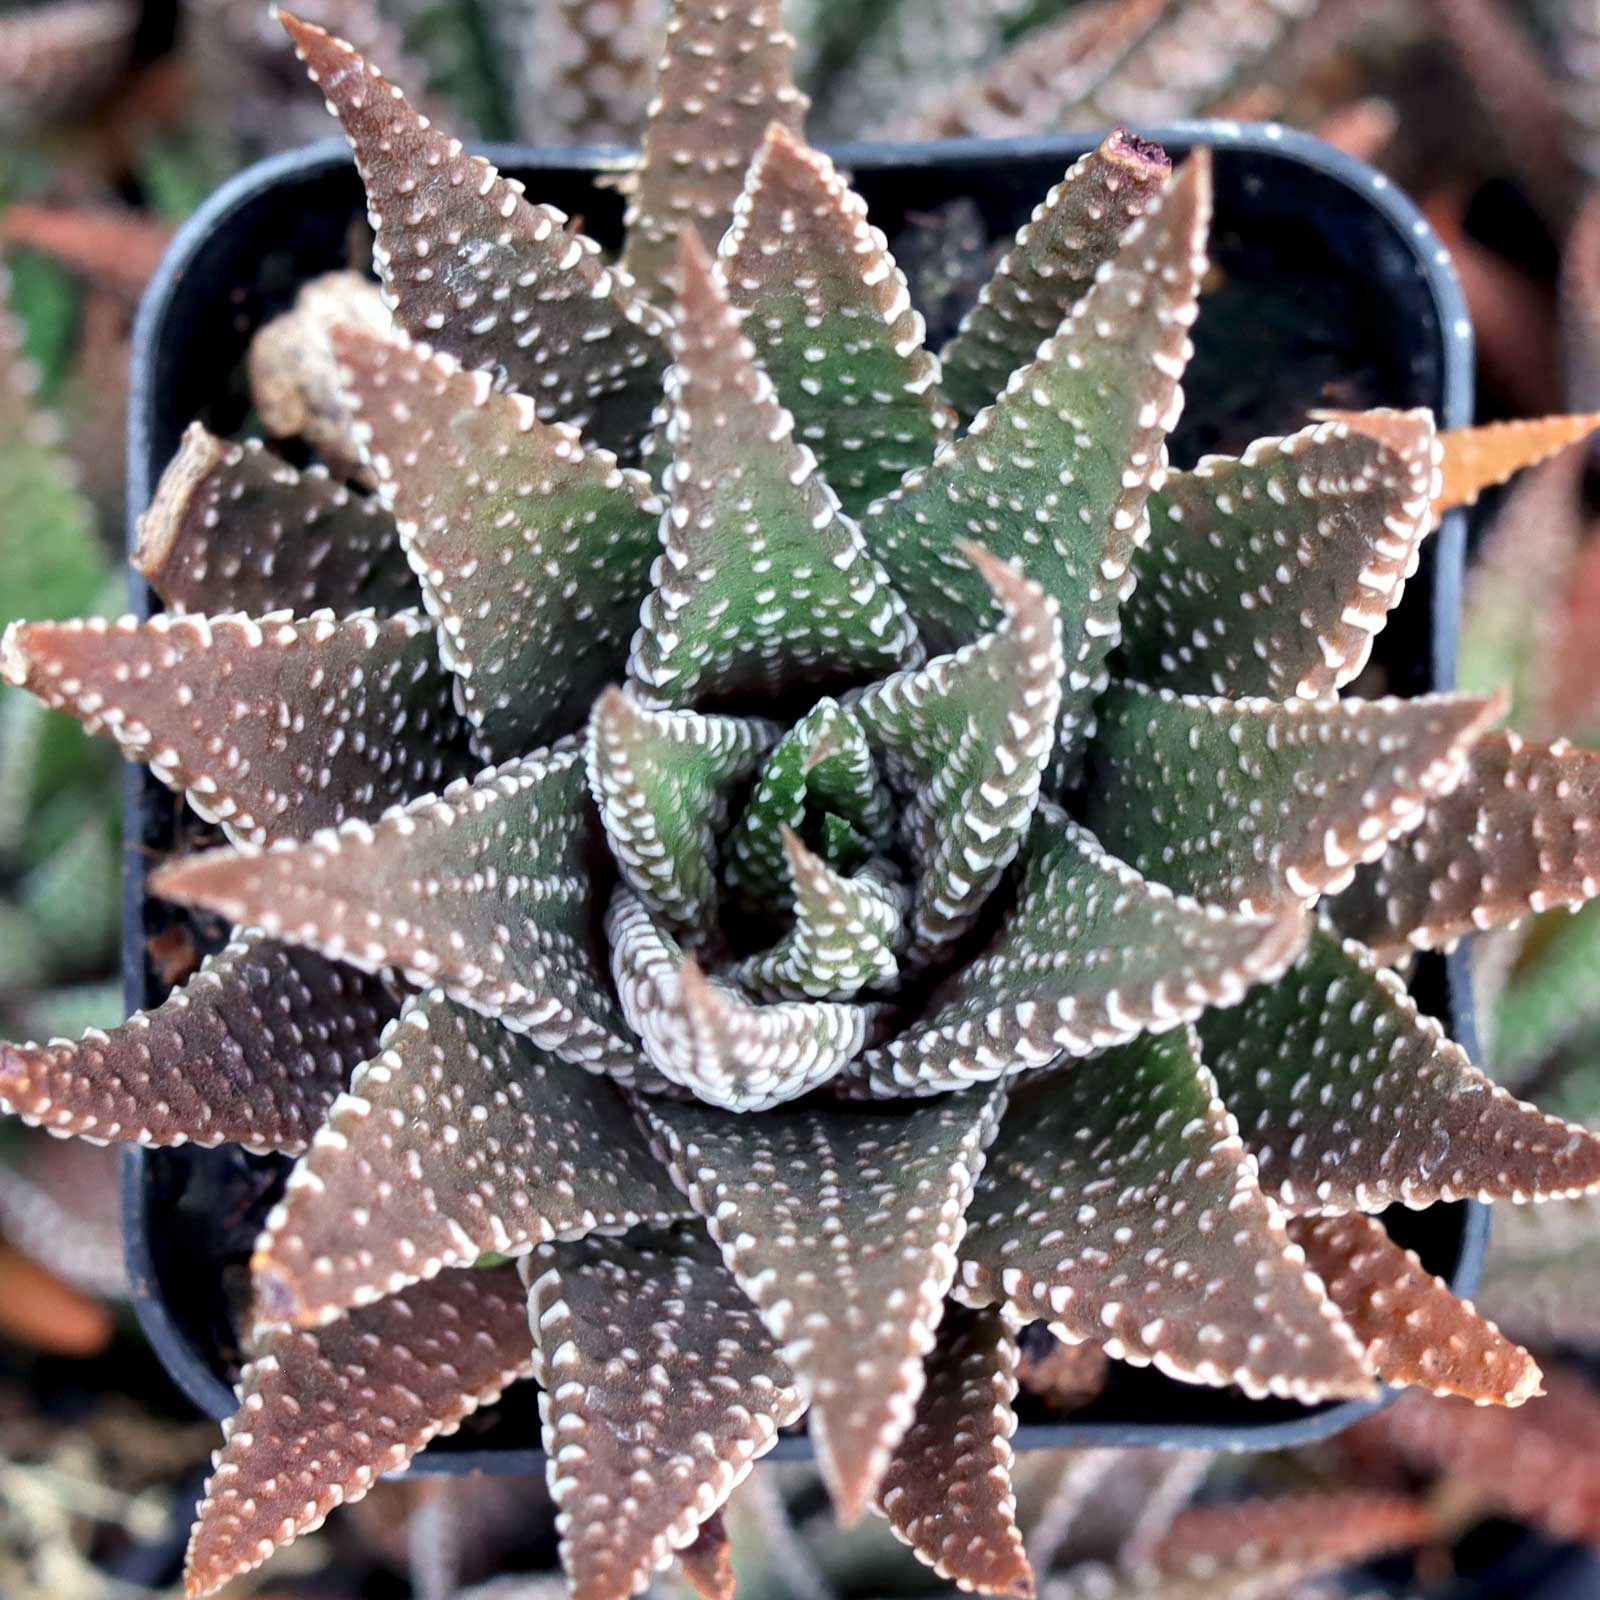 When you say that Haworthia need "deep pots", how deep does the soil need to be?